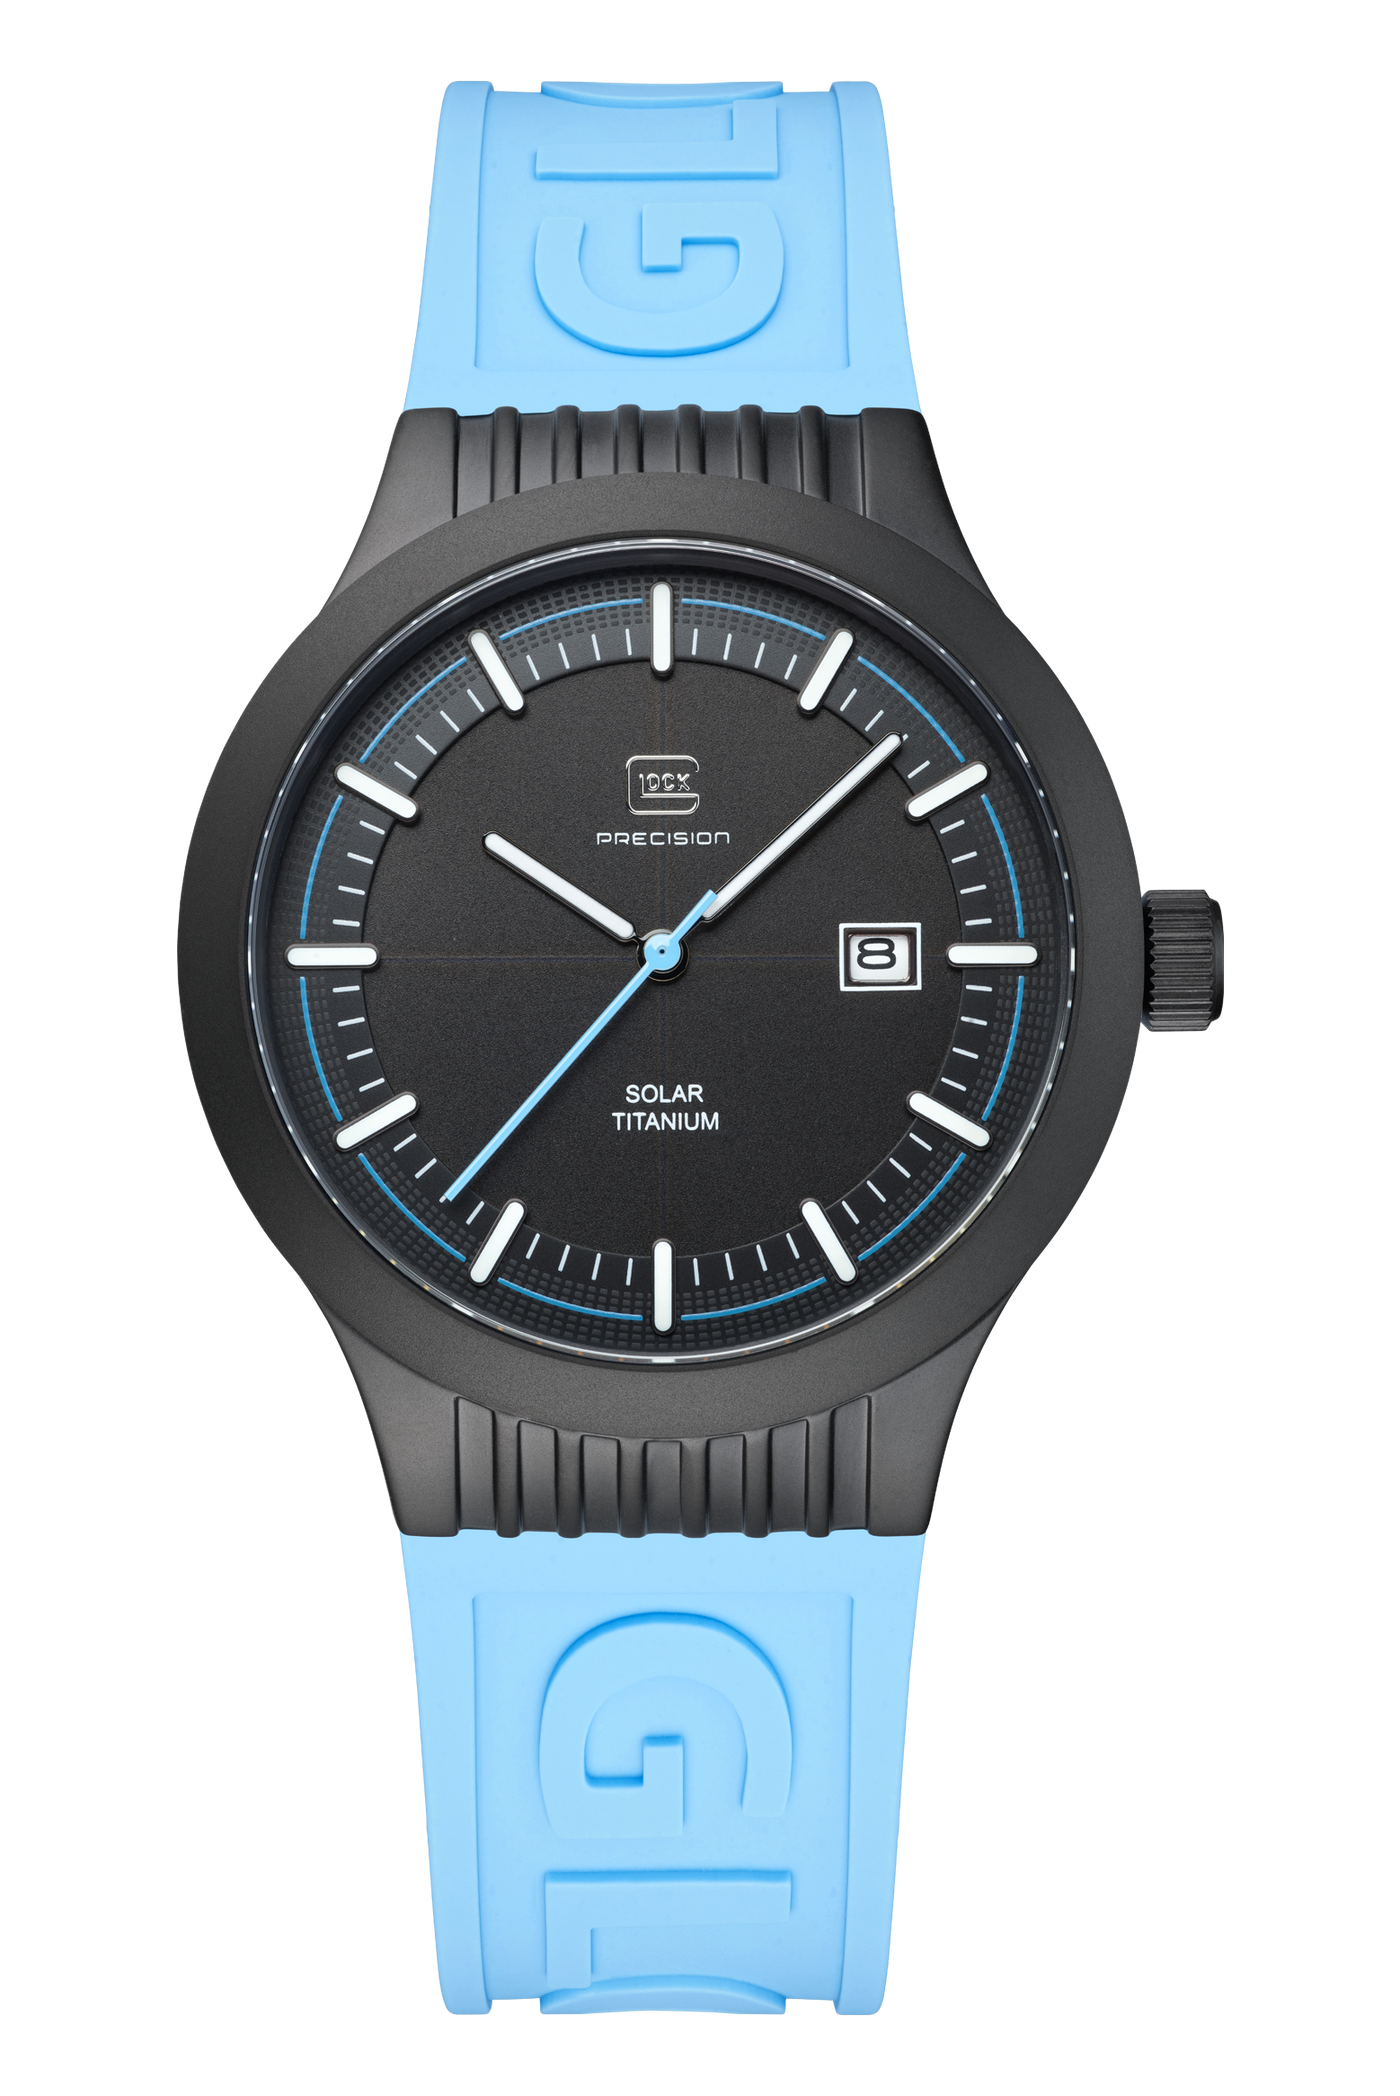 Mid-size Black Titanium Glock Watch with Black Dial and Blue Dial Accents